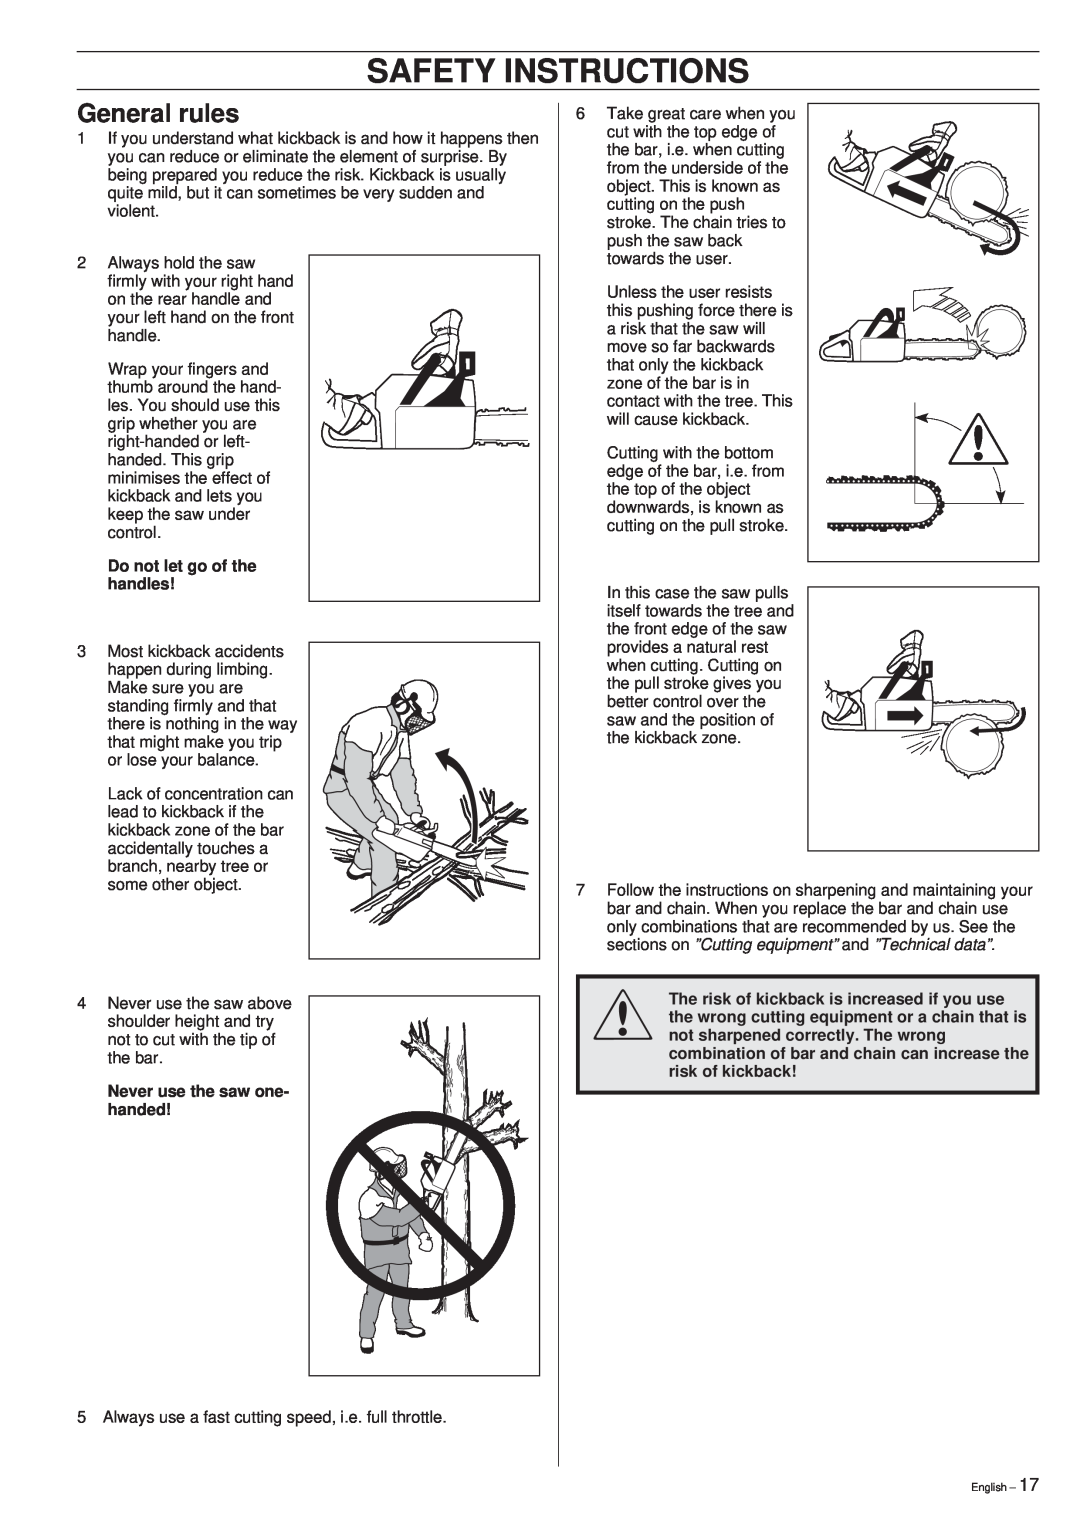 Husqvarna 288XP/XP lite Safety Instructions, General rules, Do not let go of the handles, Never use the saw one- handed 